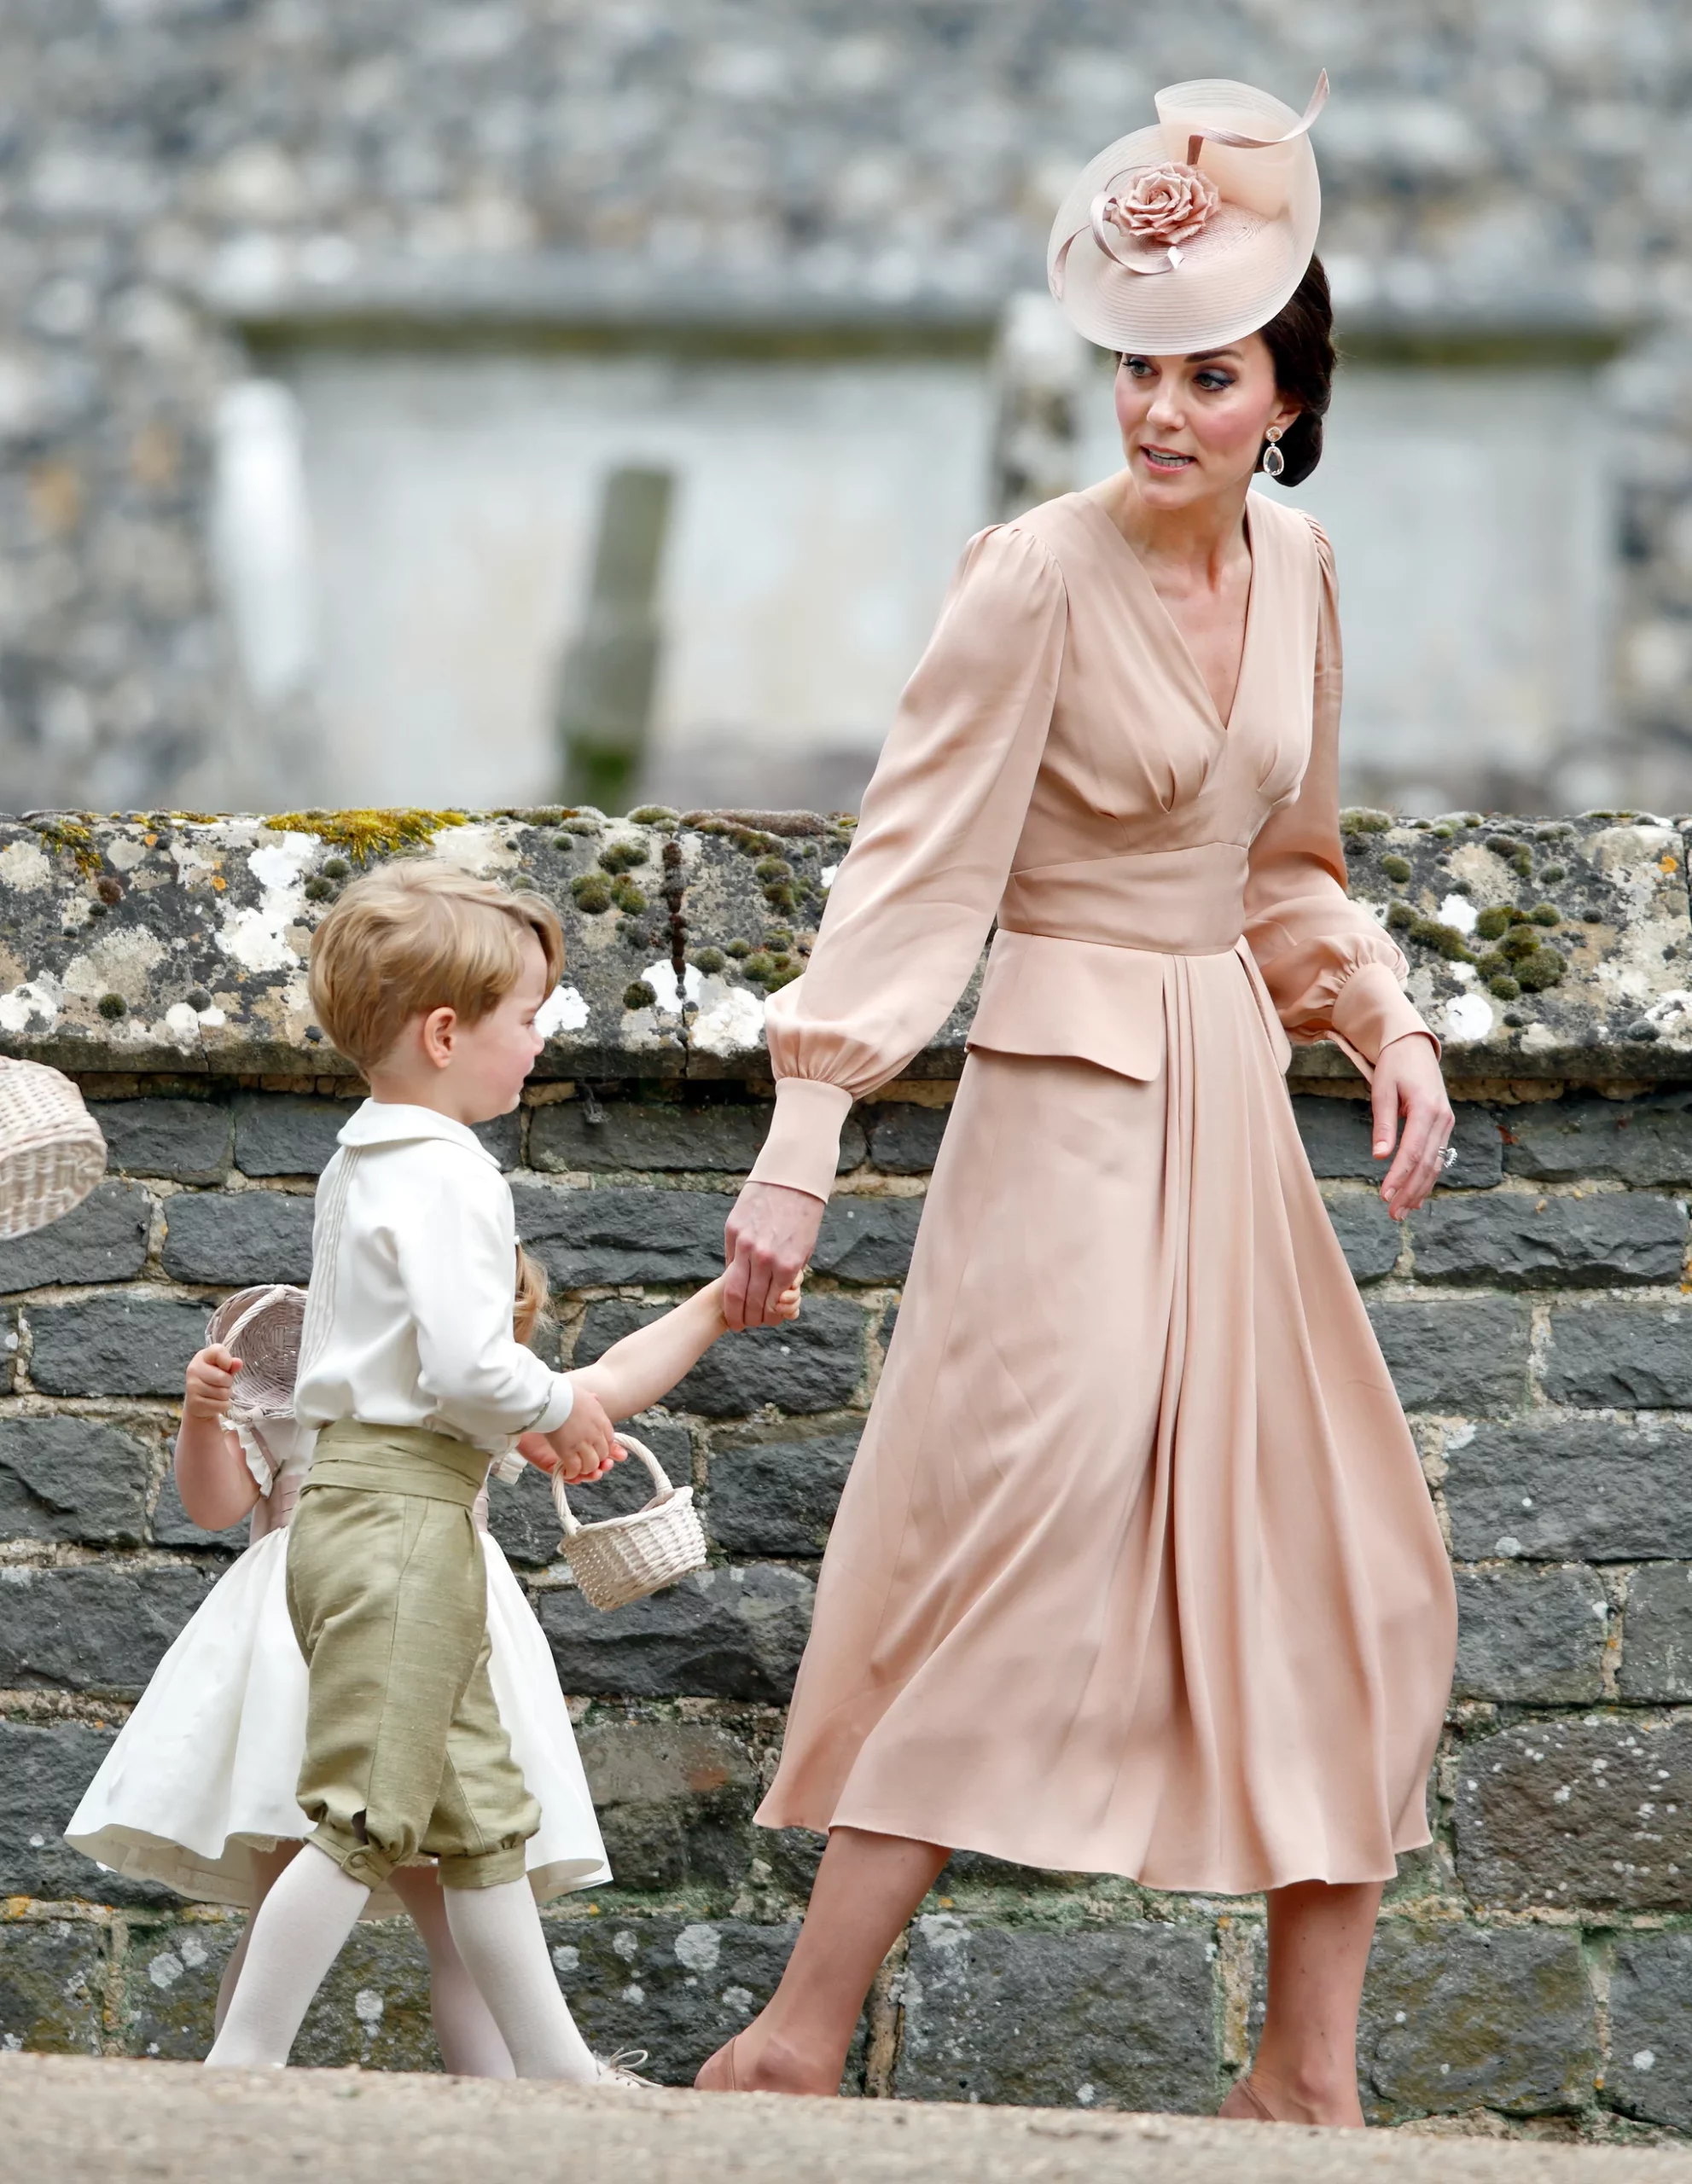 Kate wears an Alexander McQueen gown to Pippa Middleton's wedding